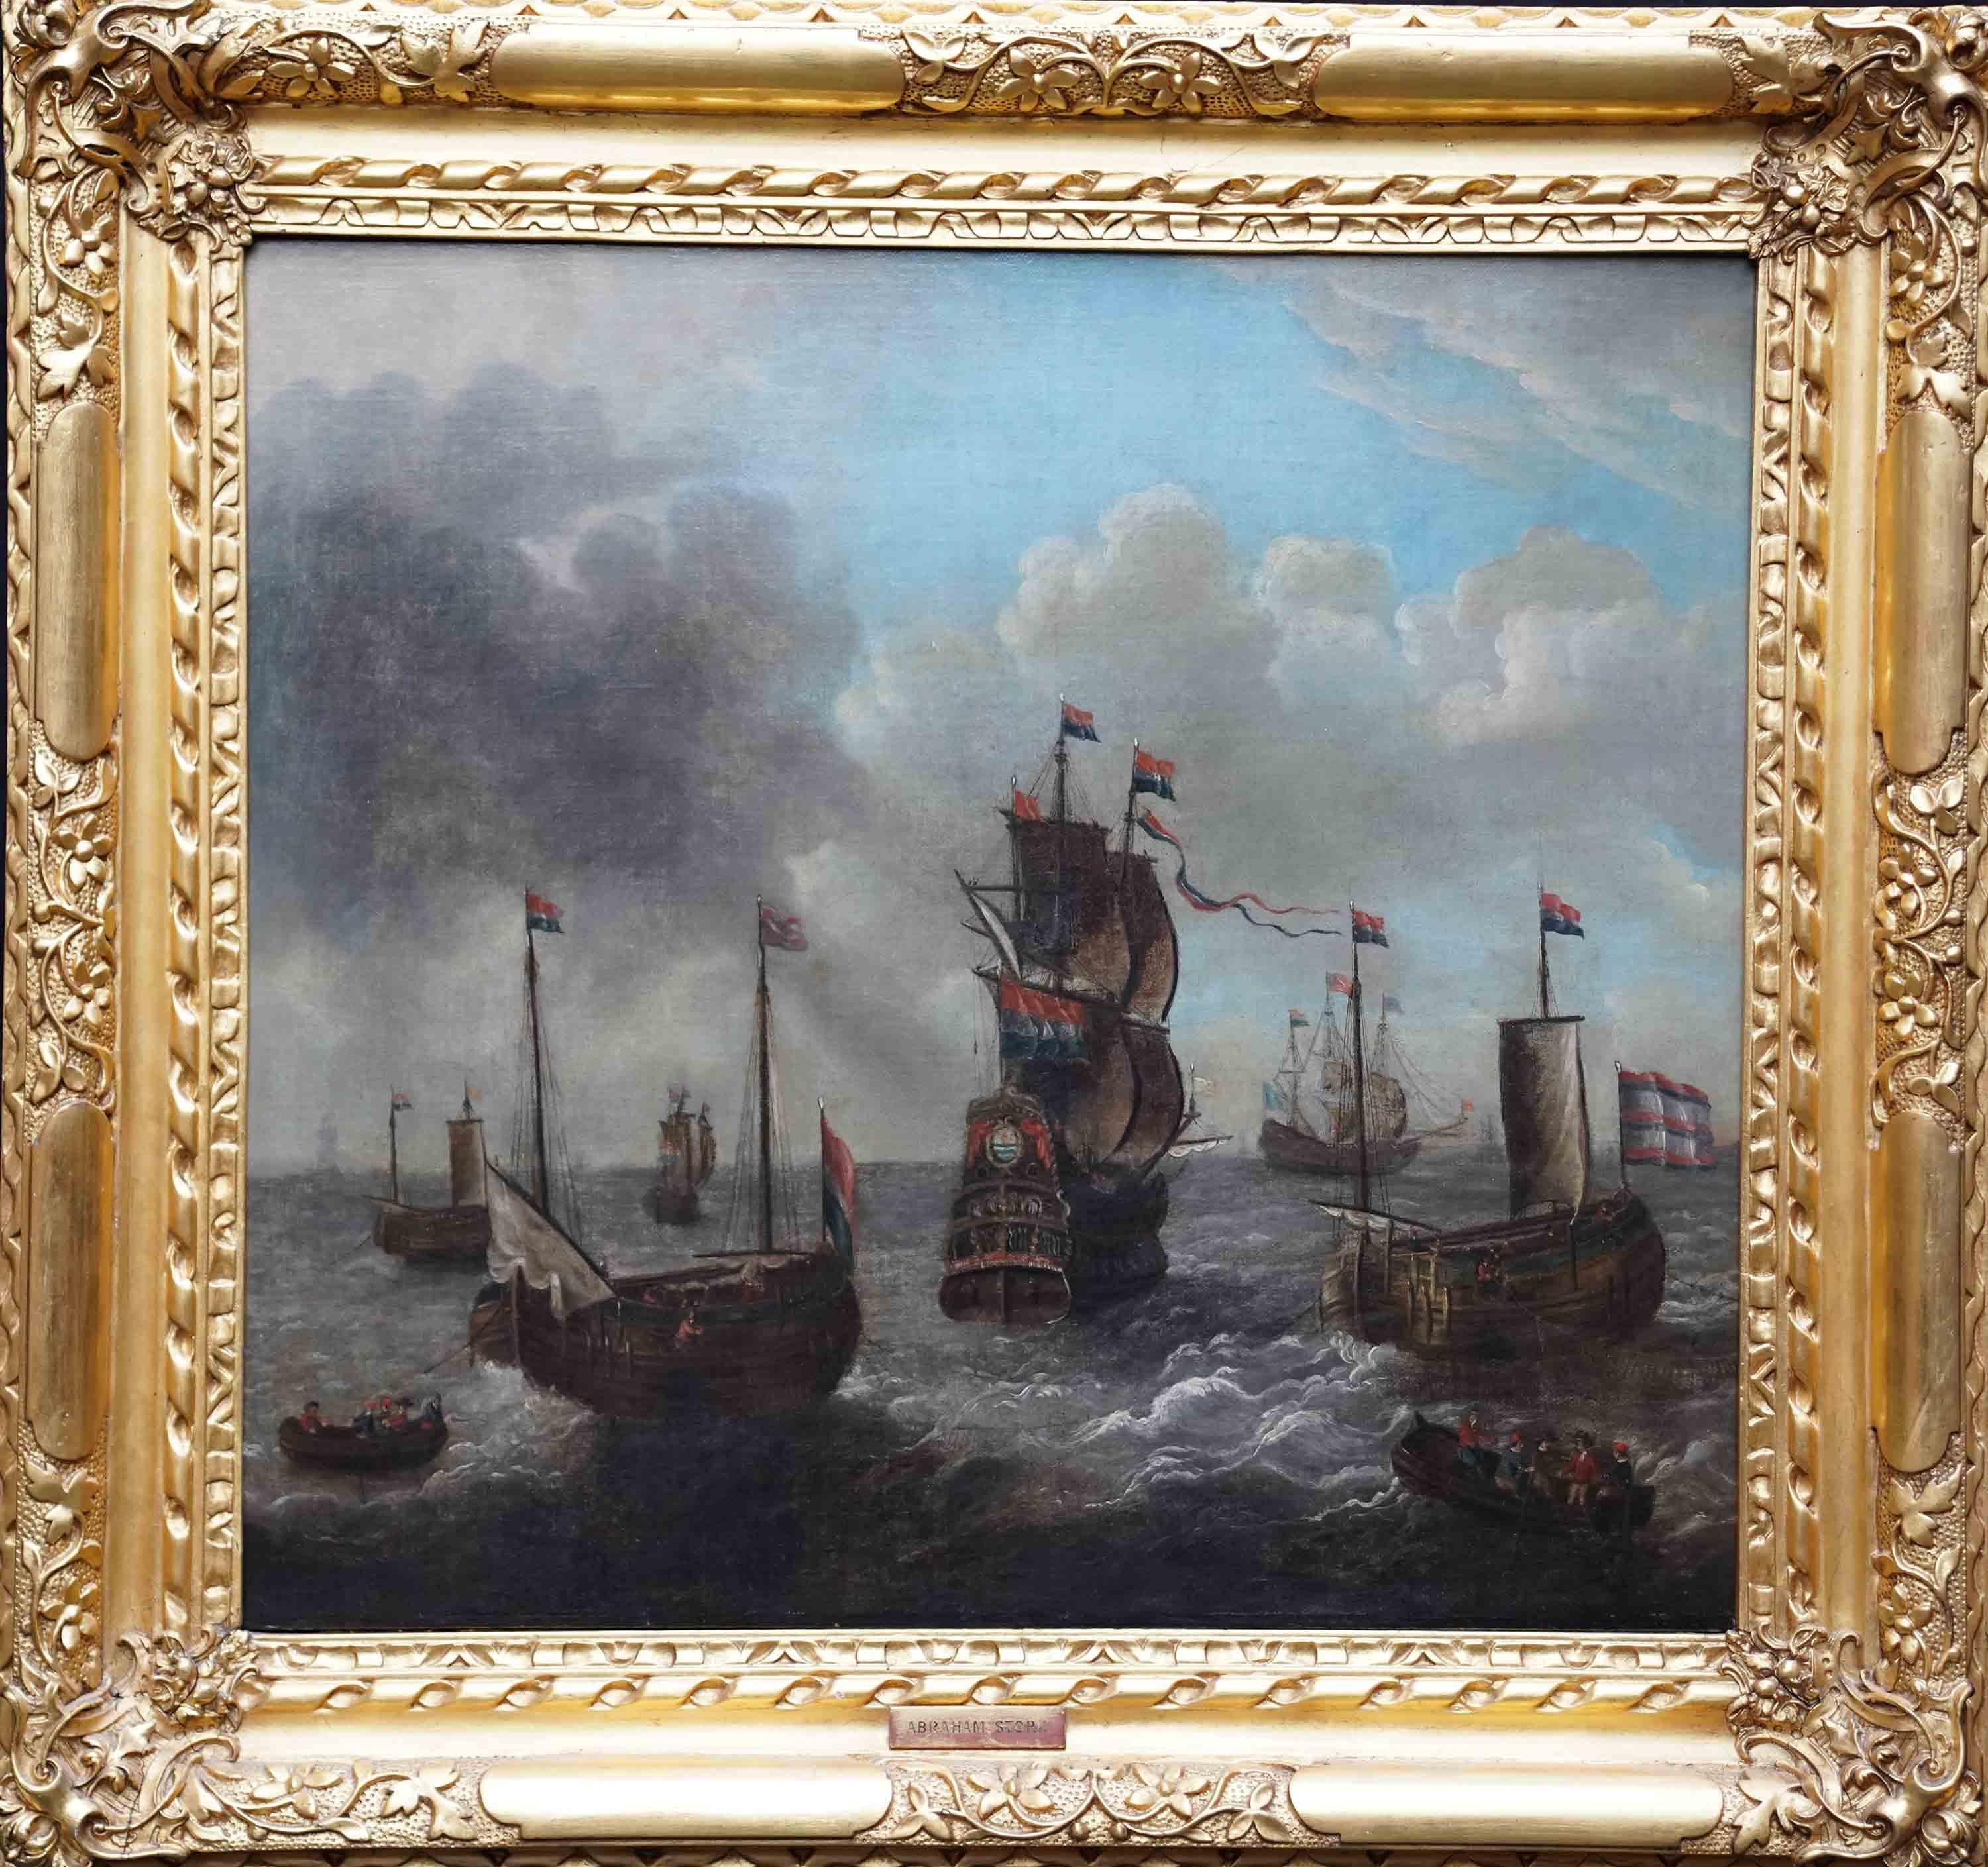 Ships Heading to Sea - Dutch 17th century Old Master marine art oil painting